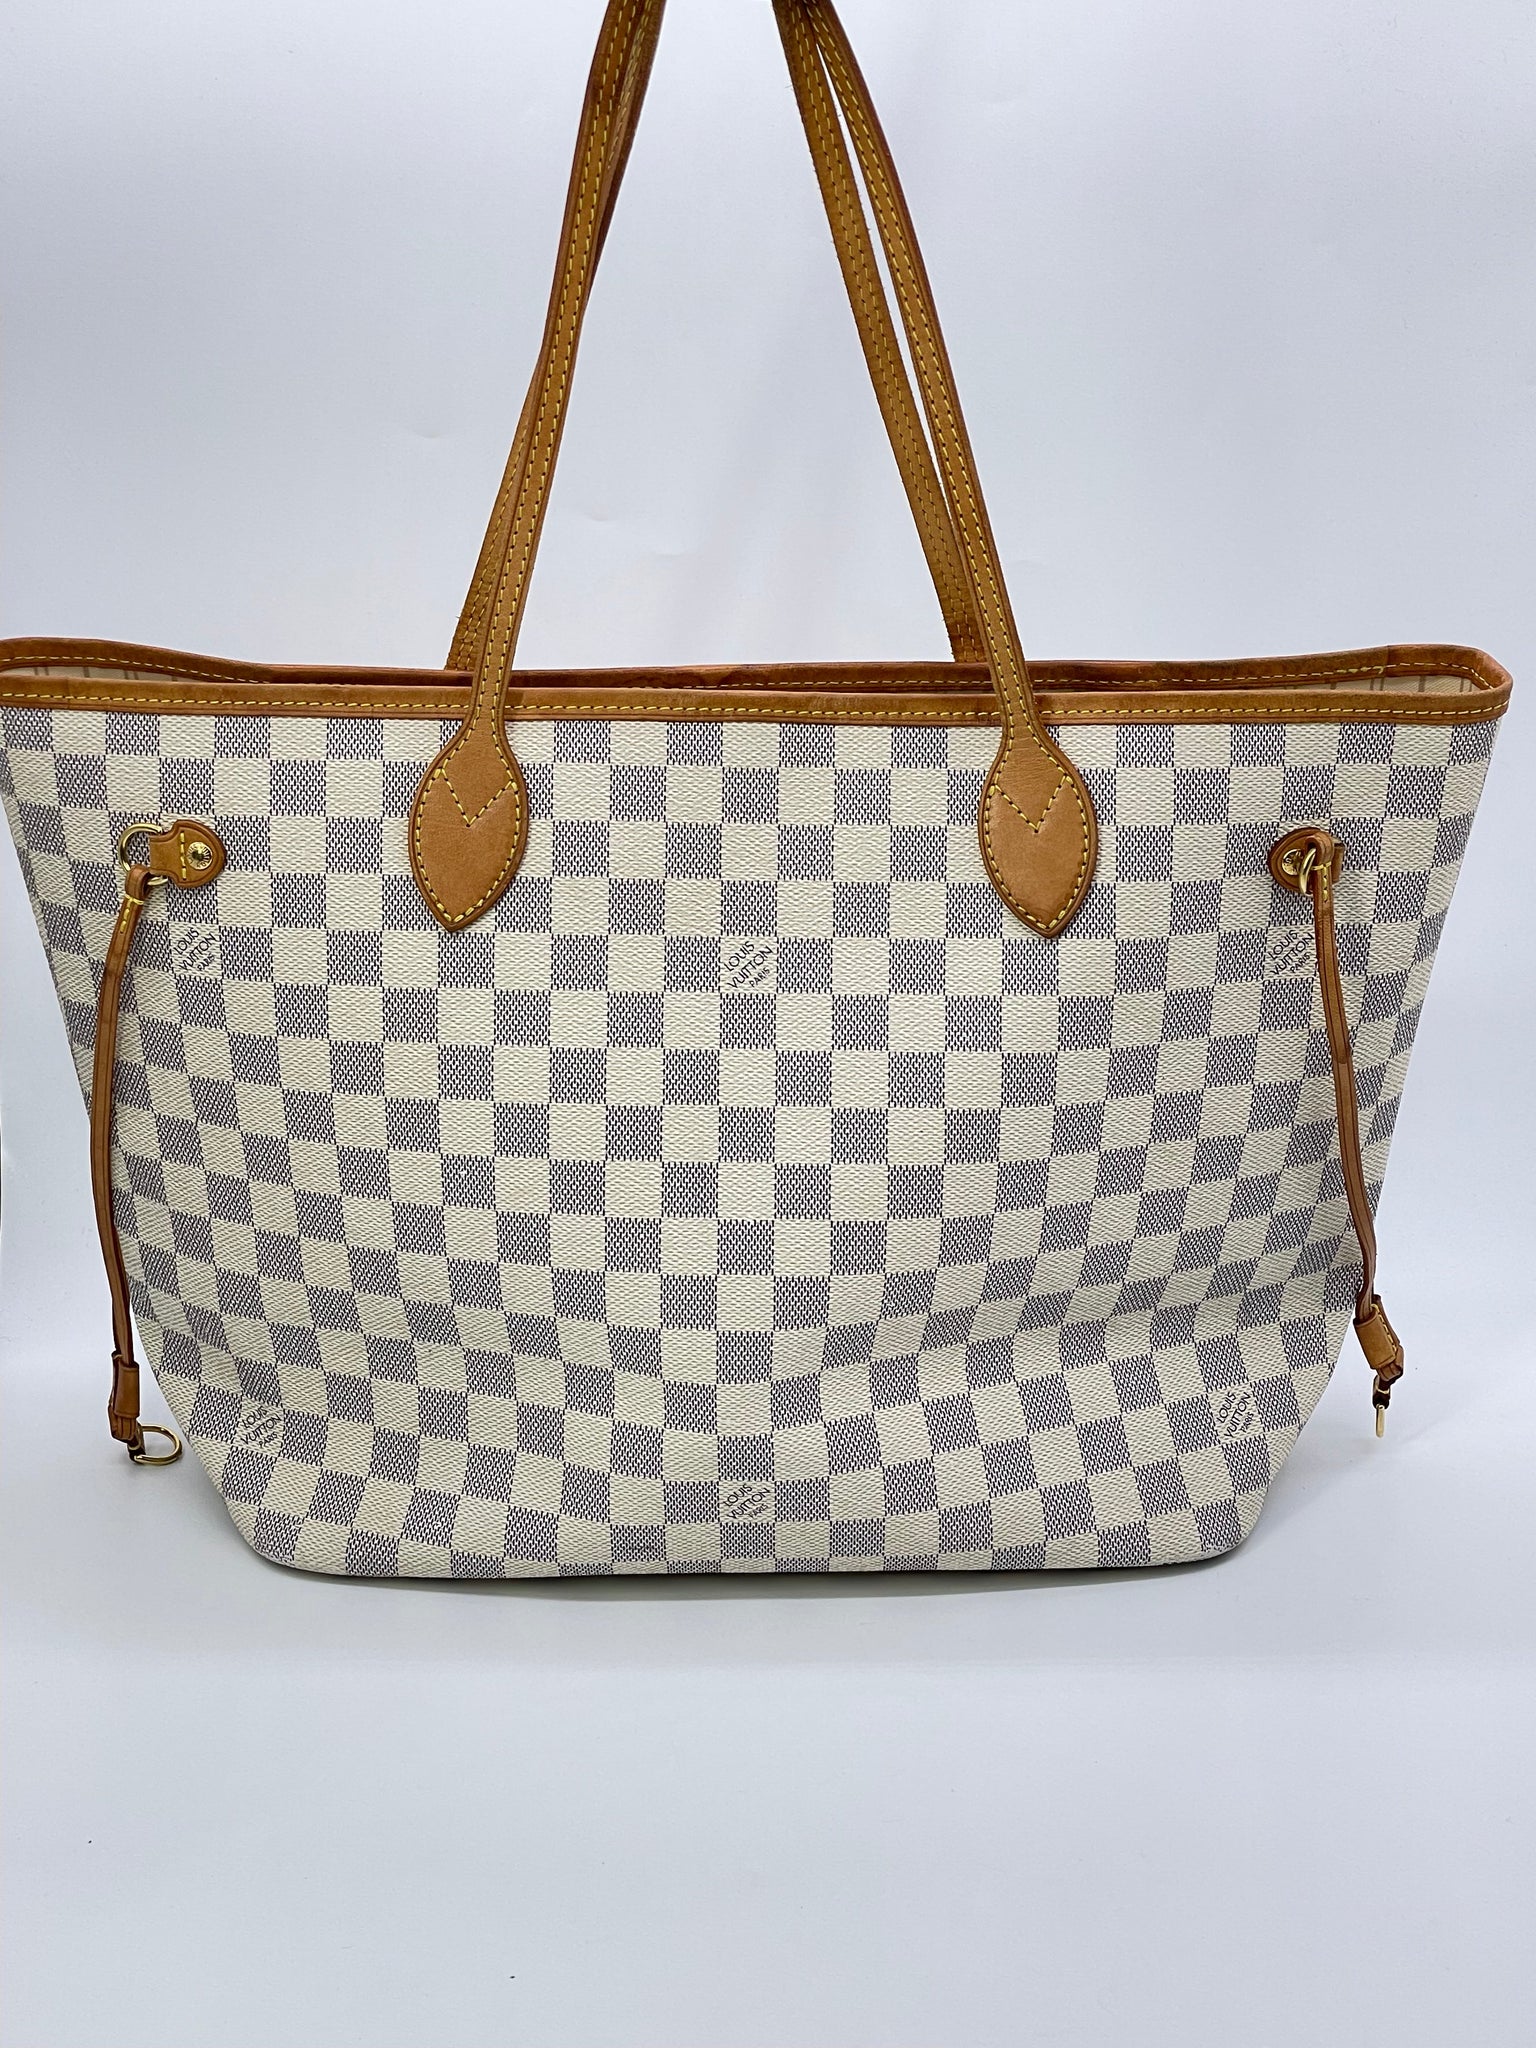 Preloved Louis Vuitton Damier Azur Neverfull MM Tote AR2192 120122